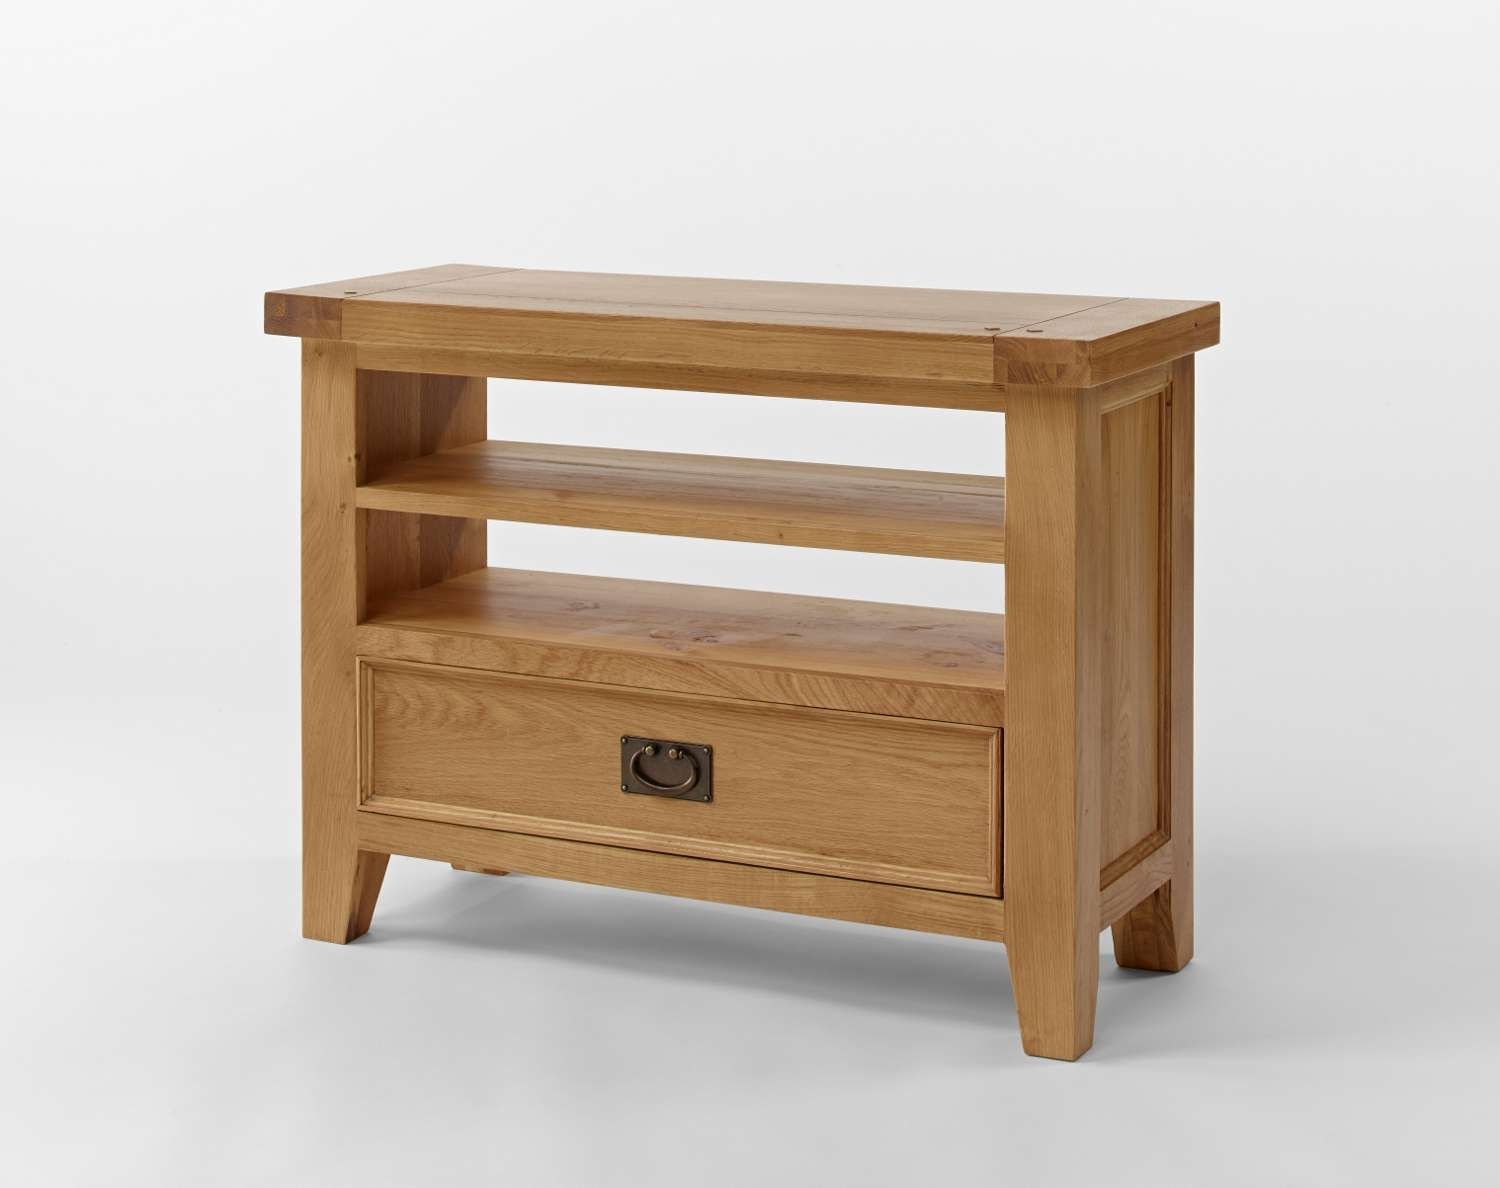 Chiltern Oak Small Tv Unit | Oak Furniture Solutions With Regard To Small Oak Tv Cabinets (View 1 of 20)